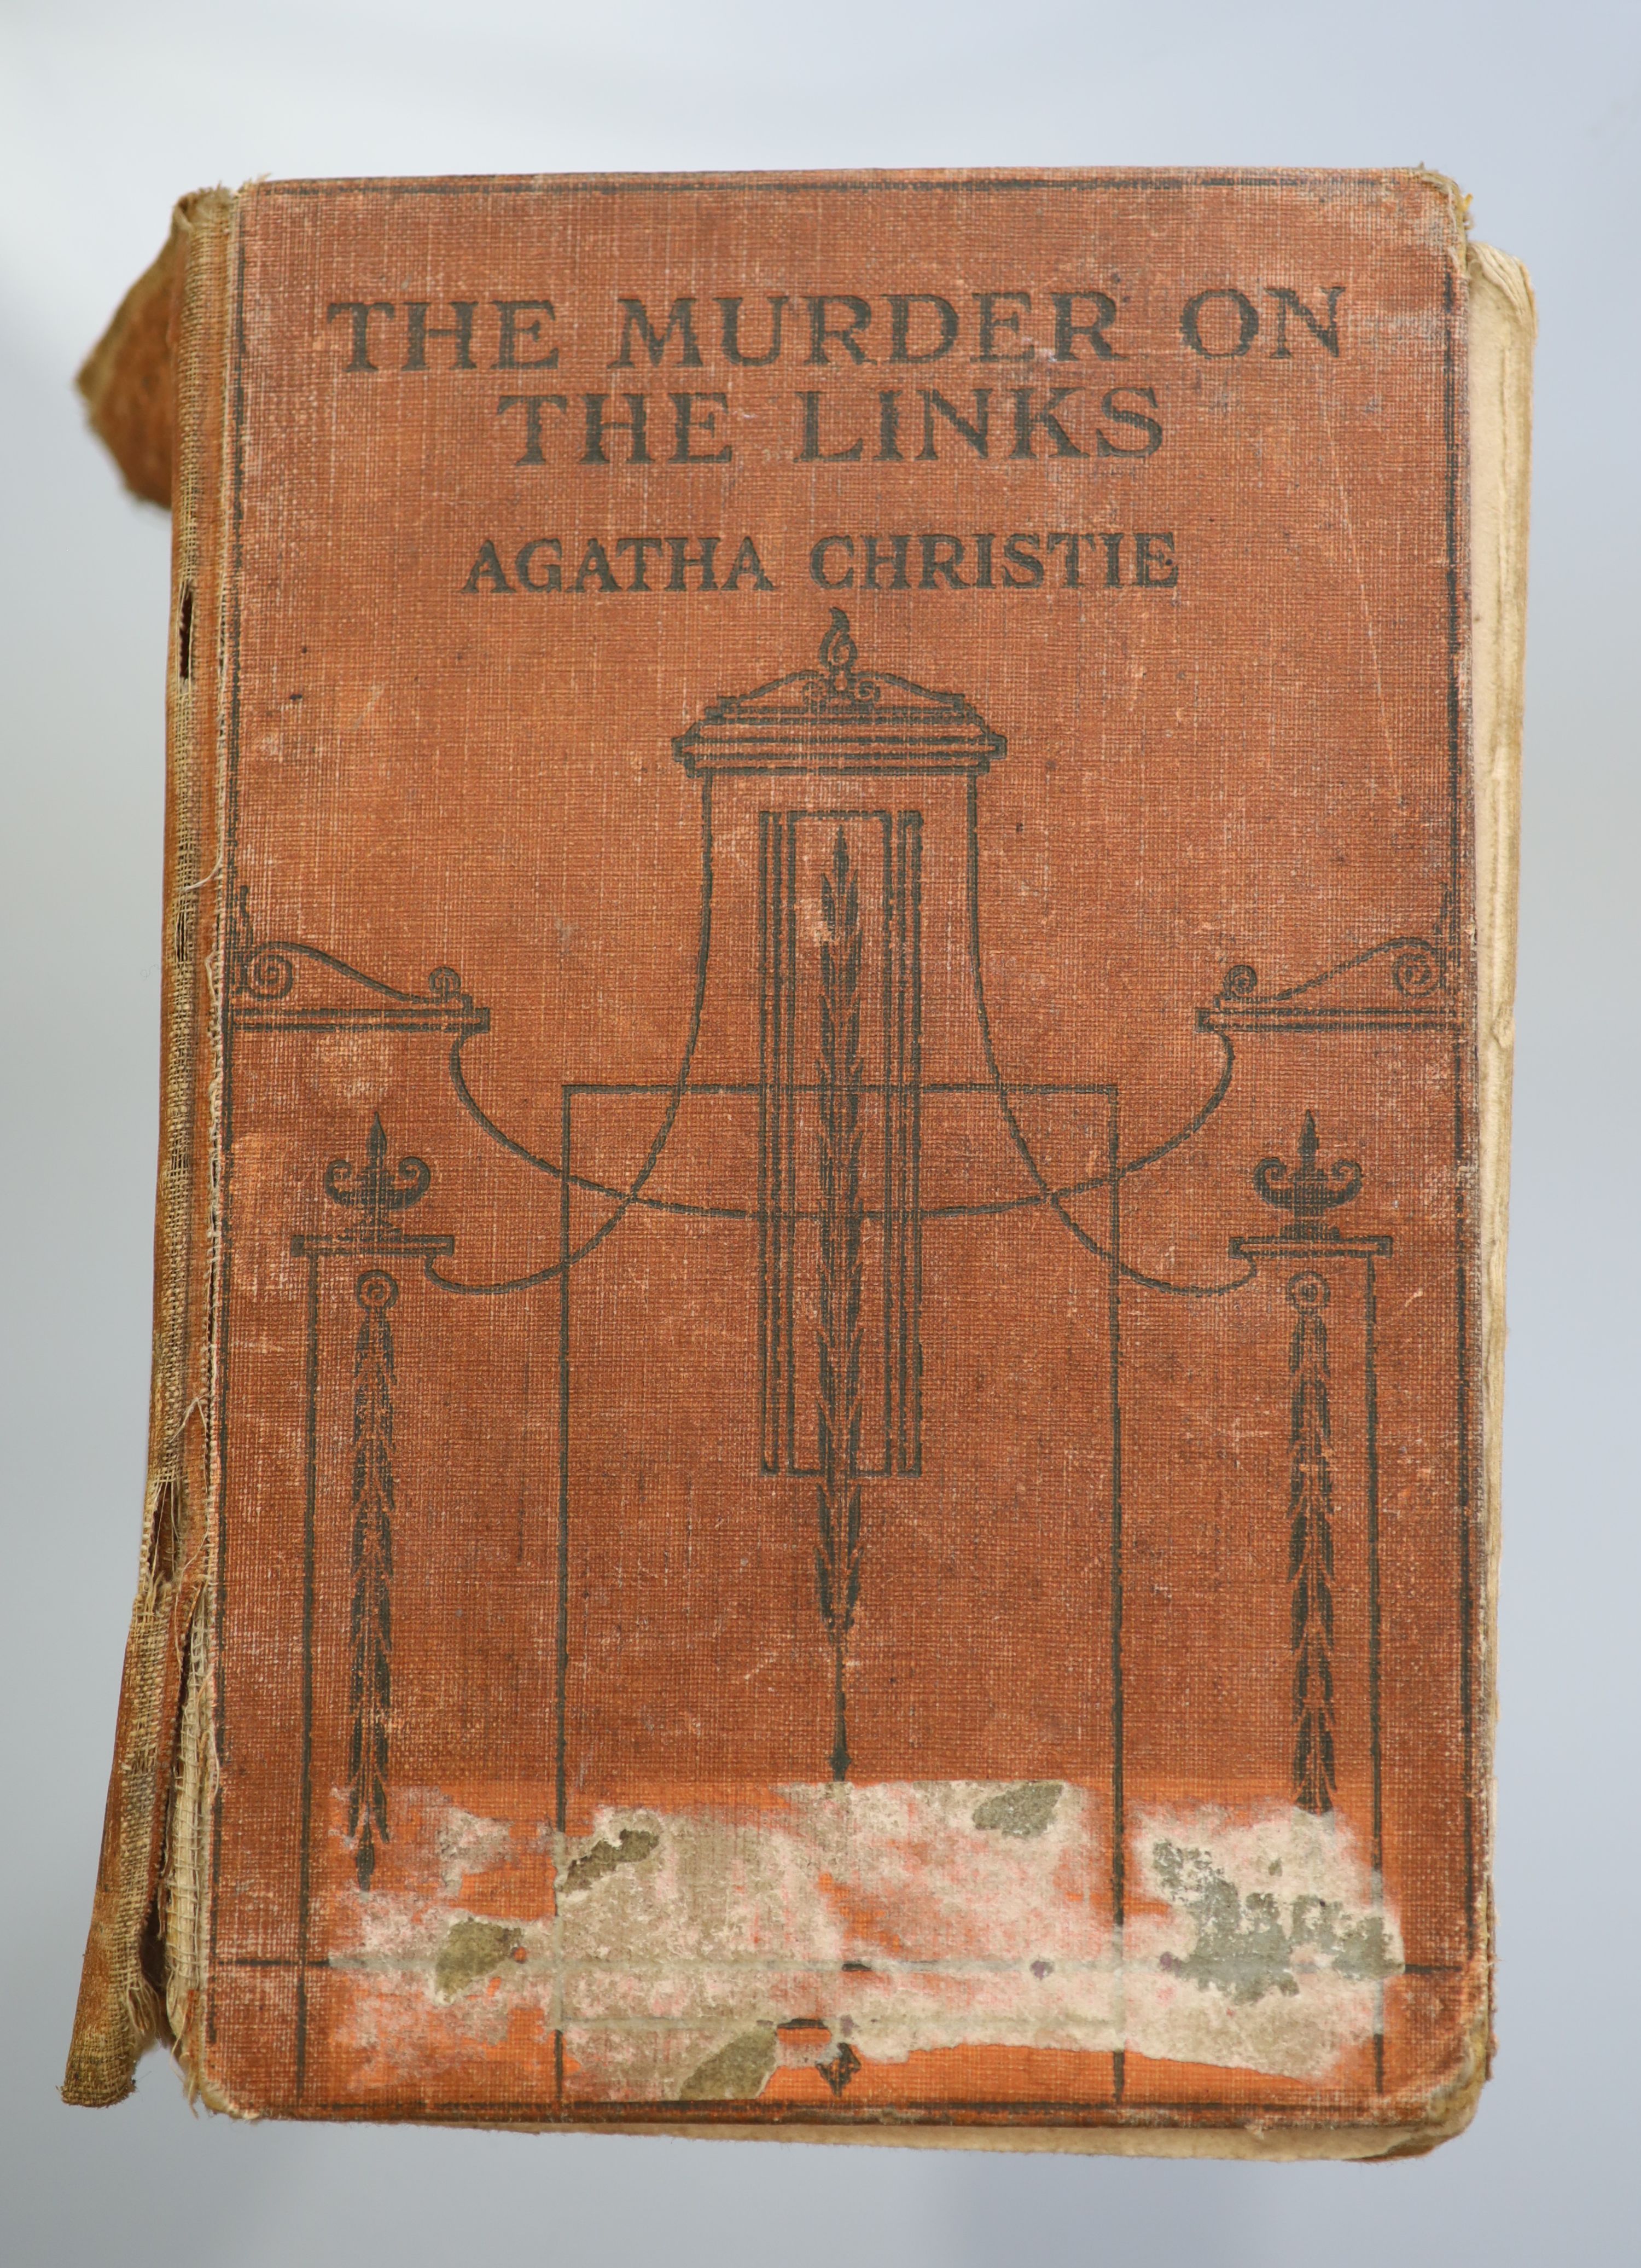 Agatha Christie - Murder on the Links, rare first edition, first impression, 1923, poor condition.